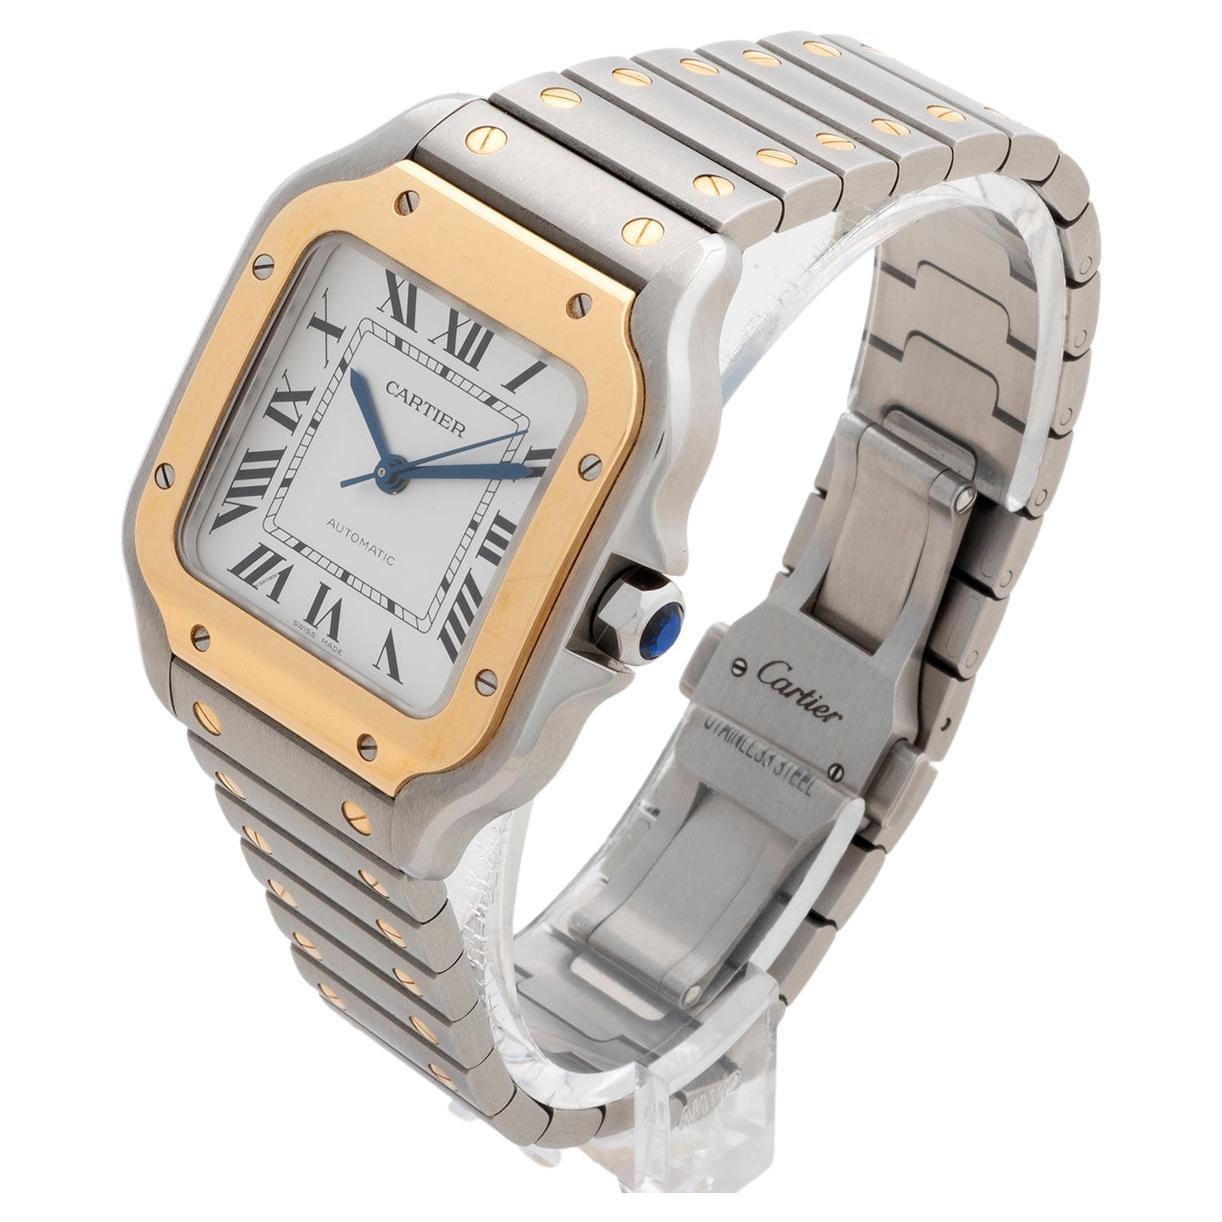 Our Cartier Santos automatic in 18k yellow gold and stainless steel is the latest version, reference W2SA0016 with 35mm case and features the quick release bracelet enabling an easy with to leather. This example is presented in excellent condition